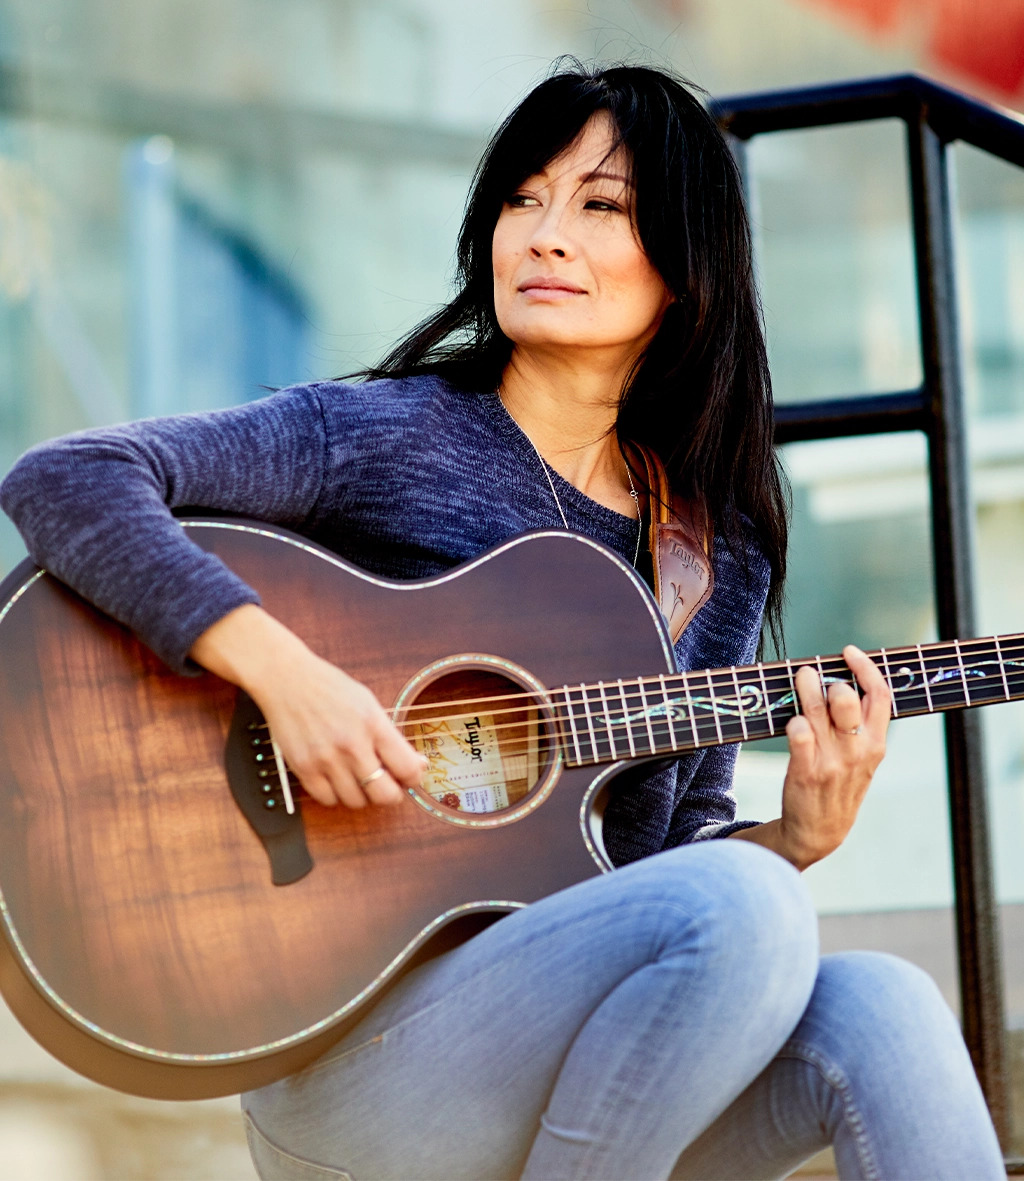 Woman staring off into distance wearing casual clothes sits down while playing guitar